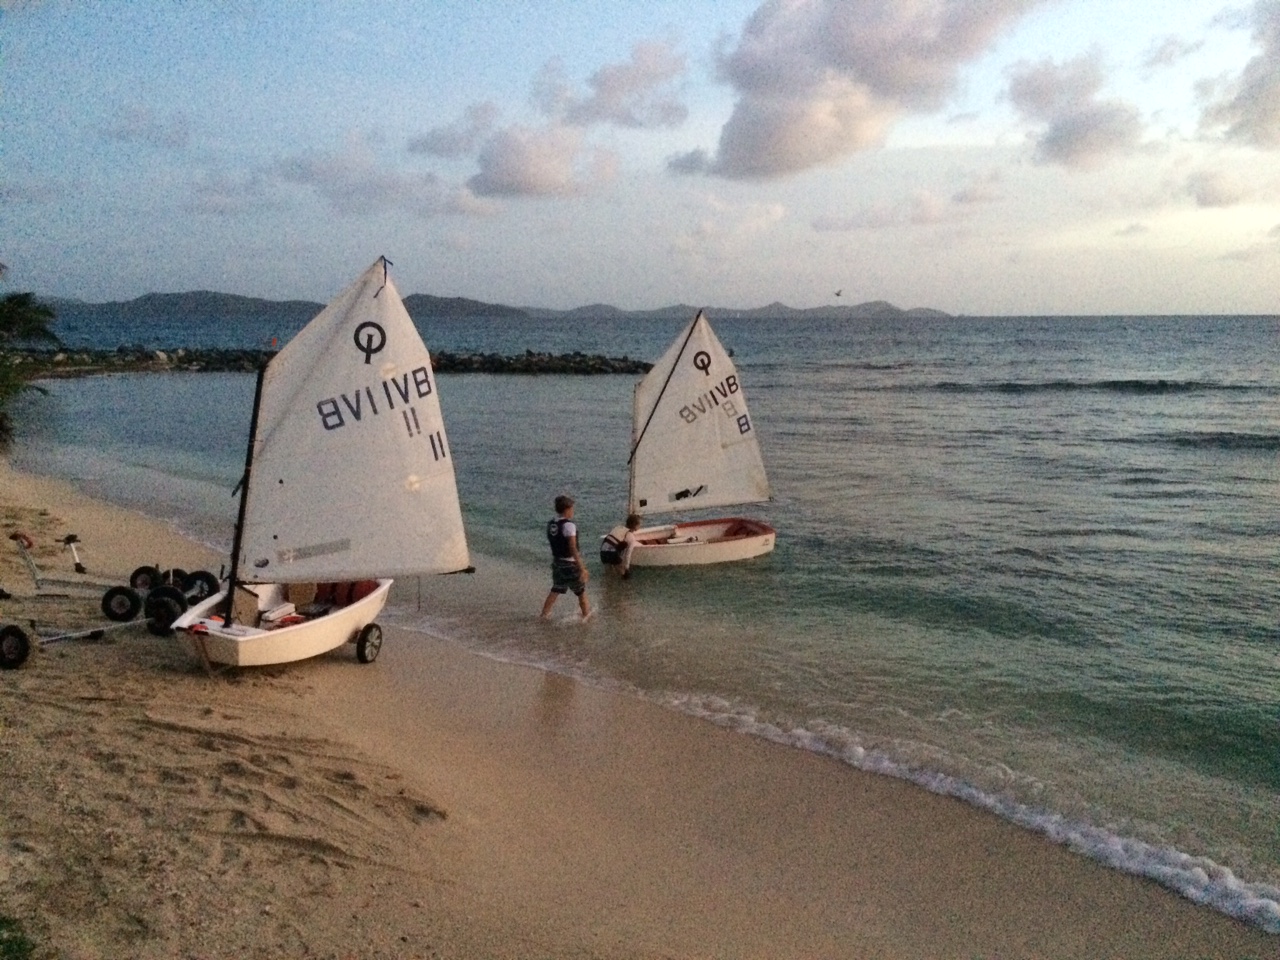 Two small sailboats coming to shore in the British Virgin Islands